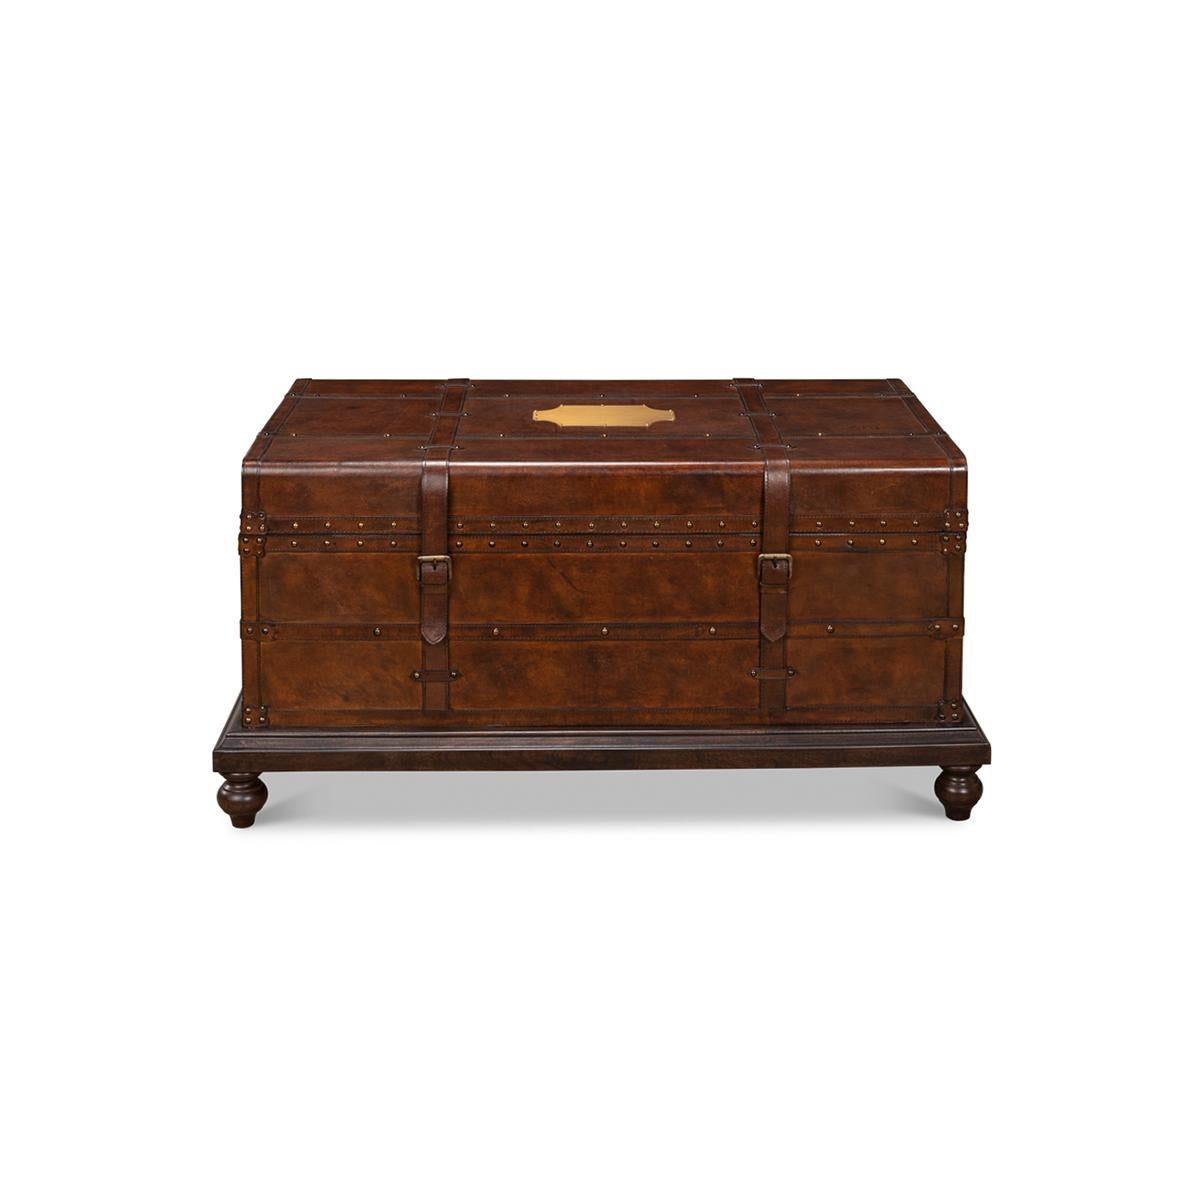 In a tobacco finish with brass nailhead details, leather belt clasps raised on a wooden base.

Dimensions: 43